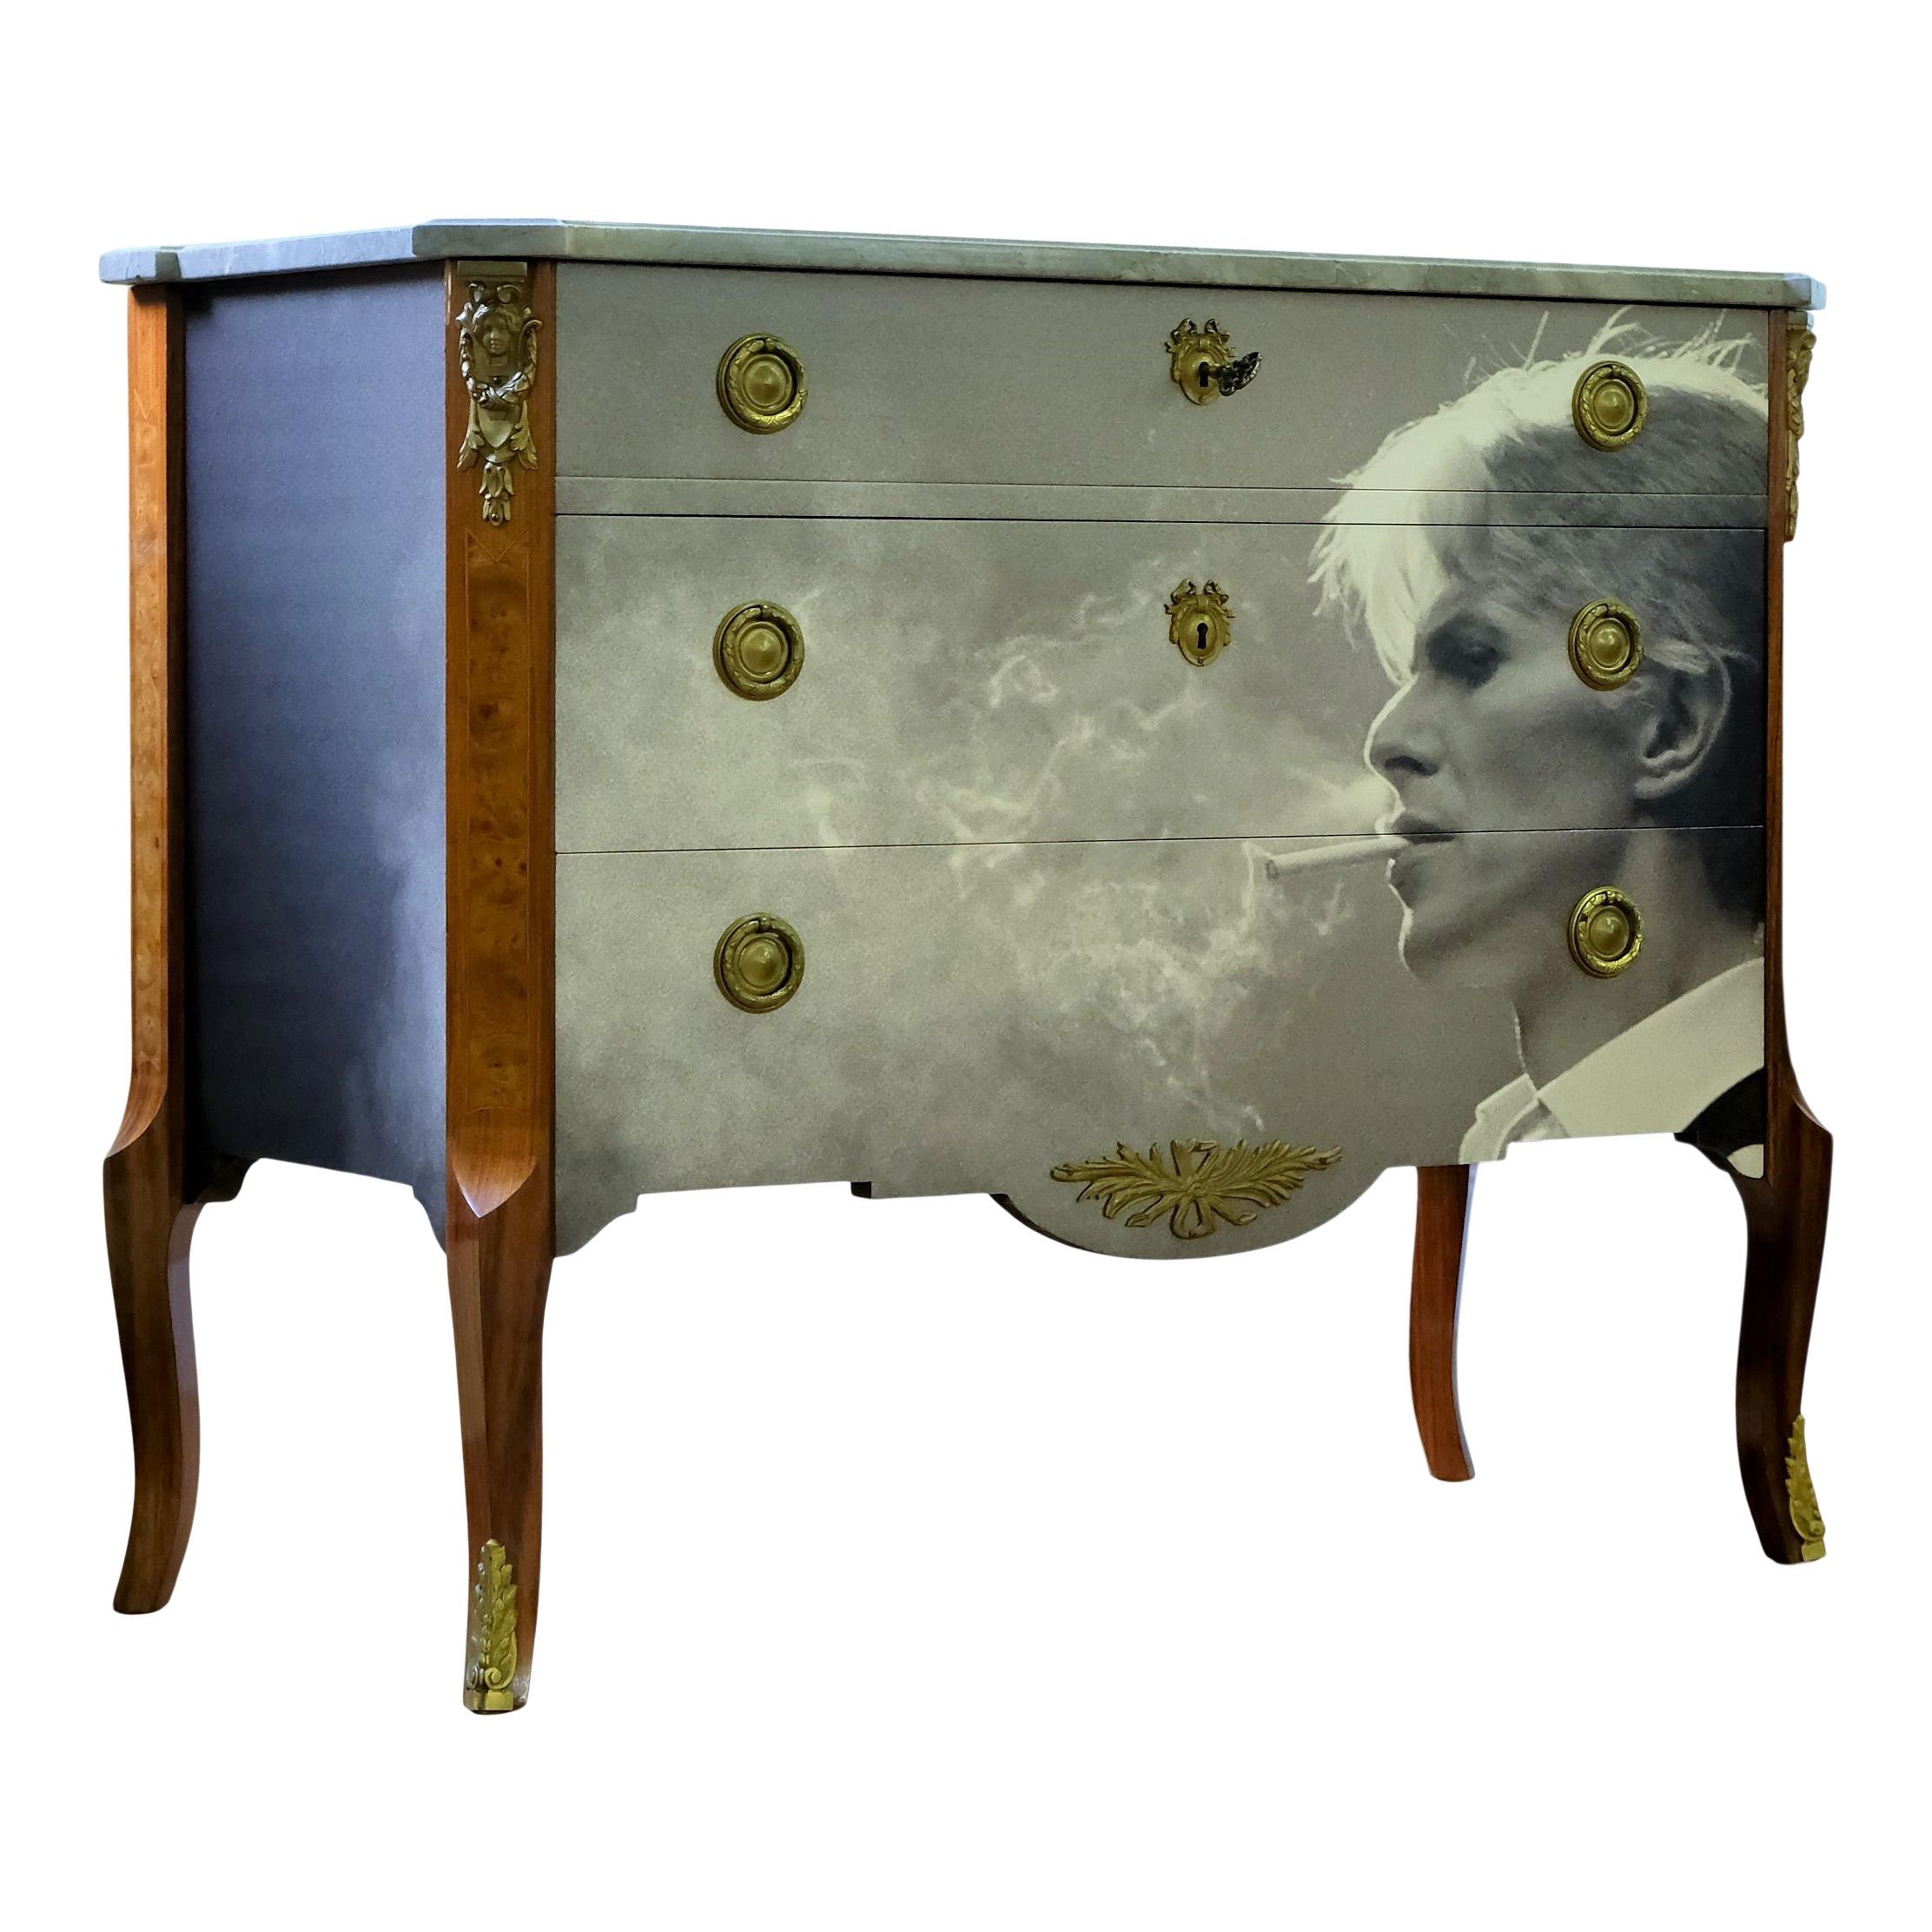 Antique Gustavian Bureau in birch wood dating from the 1920's/1930 with a lacquered photo print David Bowie over the front drawers and side.

Fine grey marbled slab and solid original brass fittings. 
Measures: Width: 108cm / 42.5